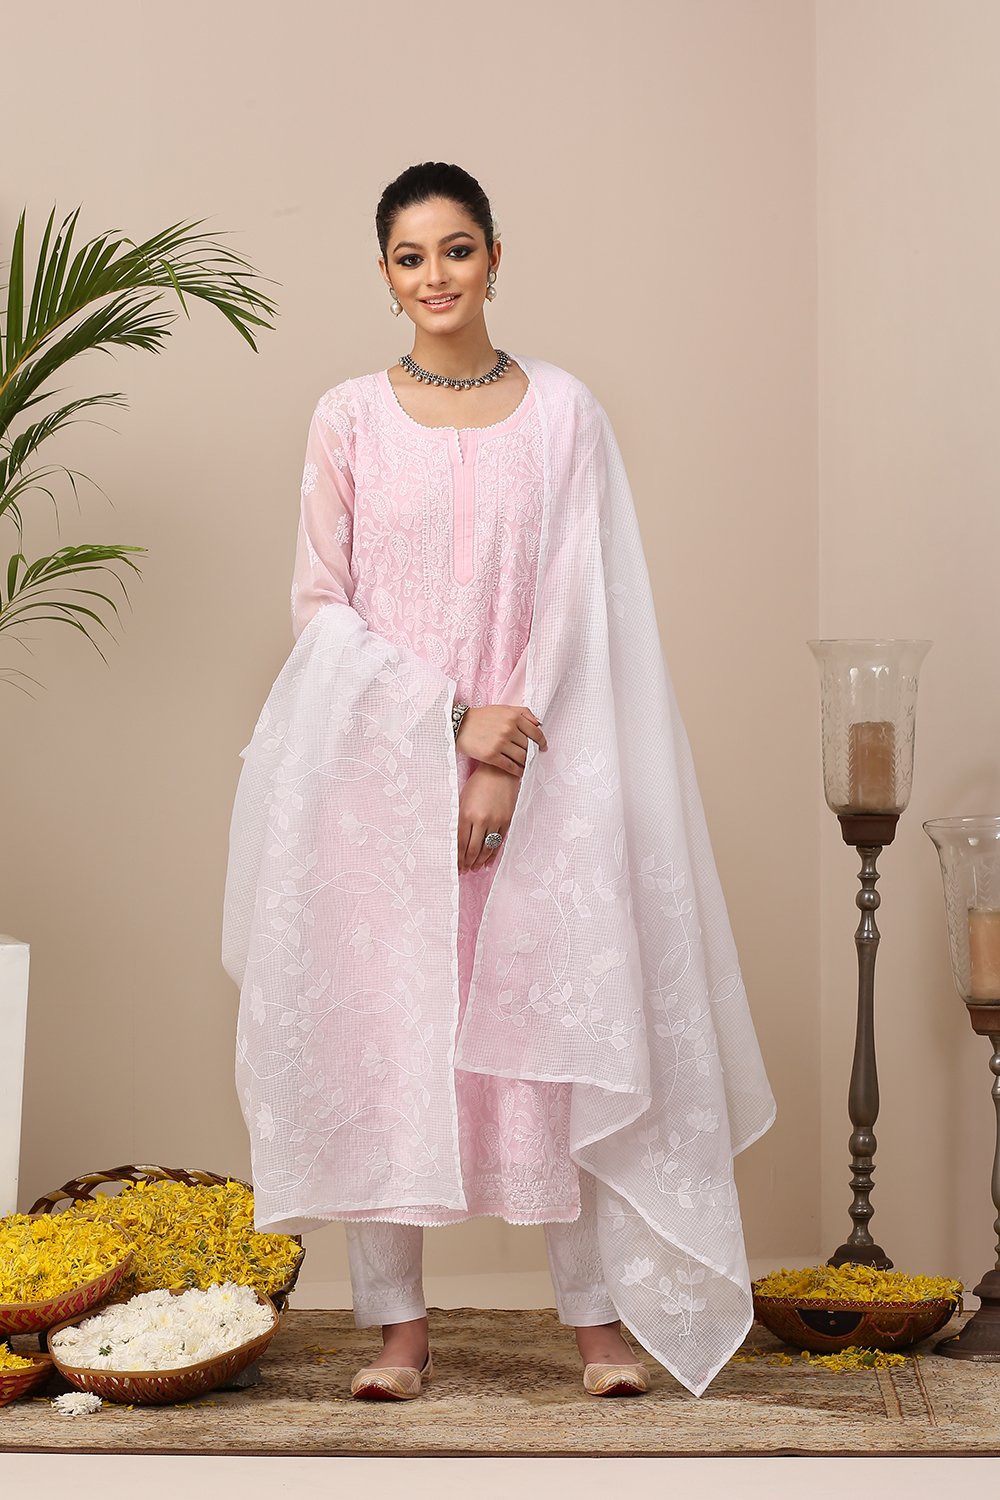 The Designer Kurtis For Women Are Ideal to Wear At Any Occasion